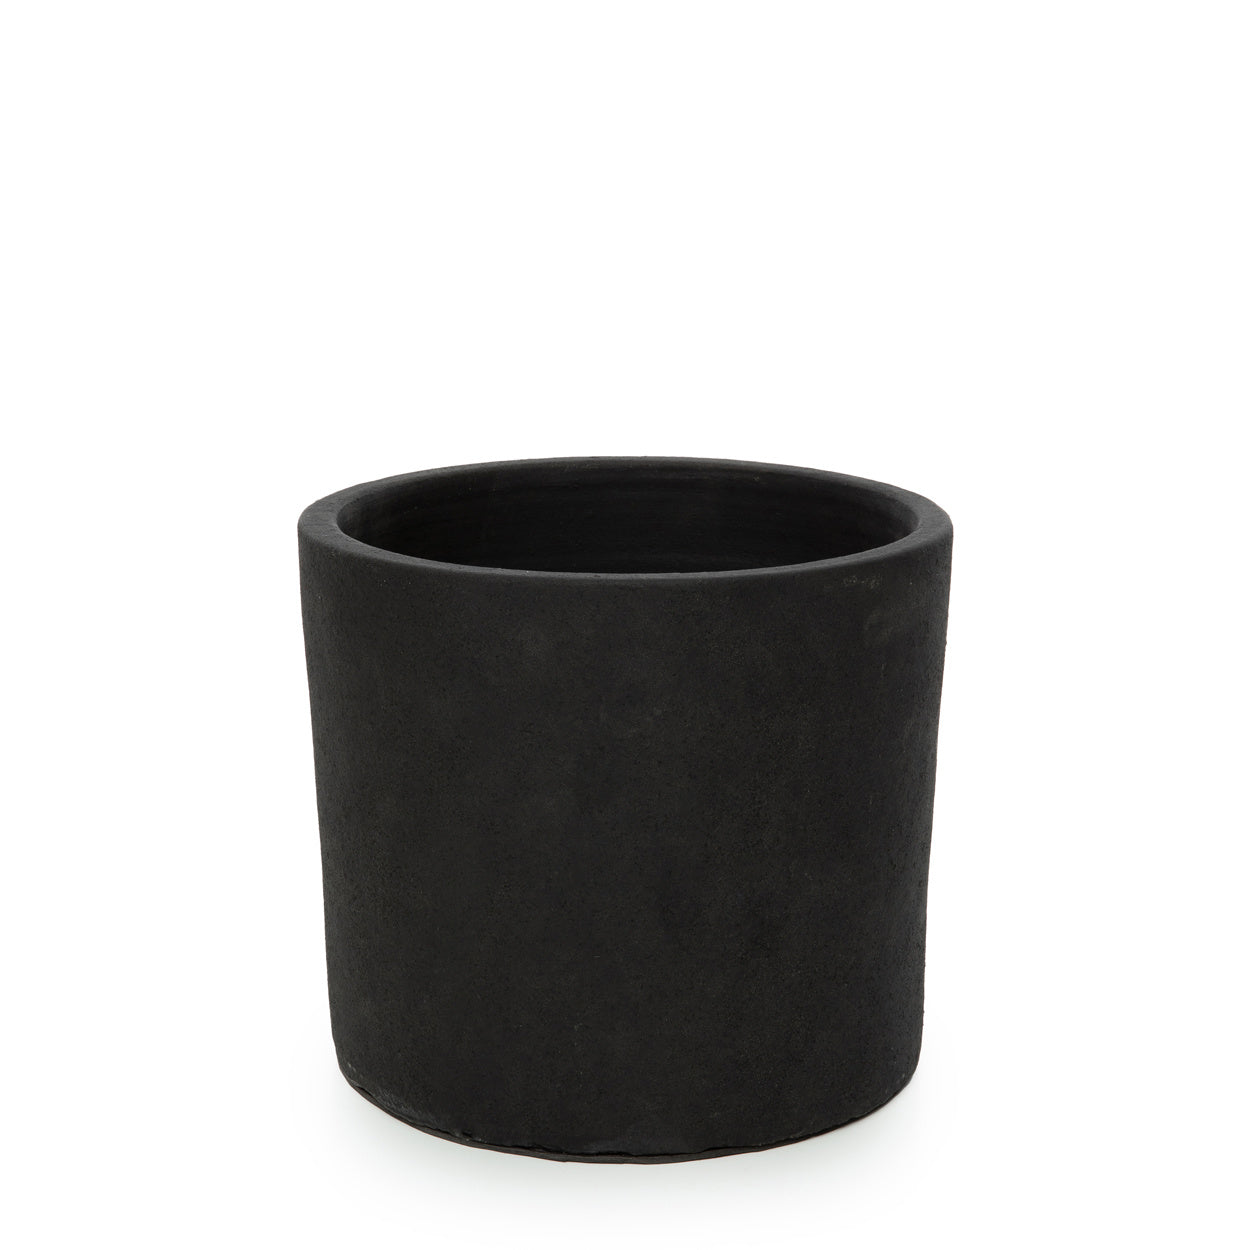 THE CHARCOAL Vase without stand